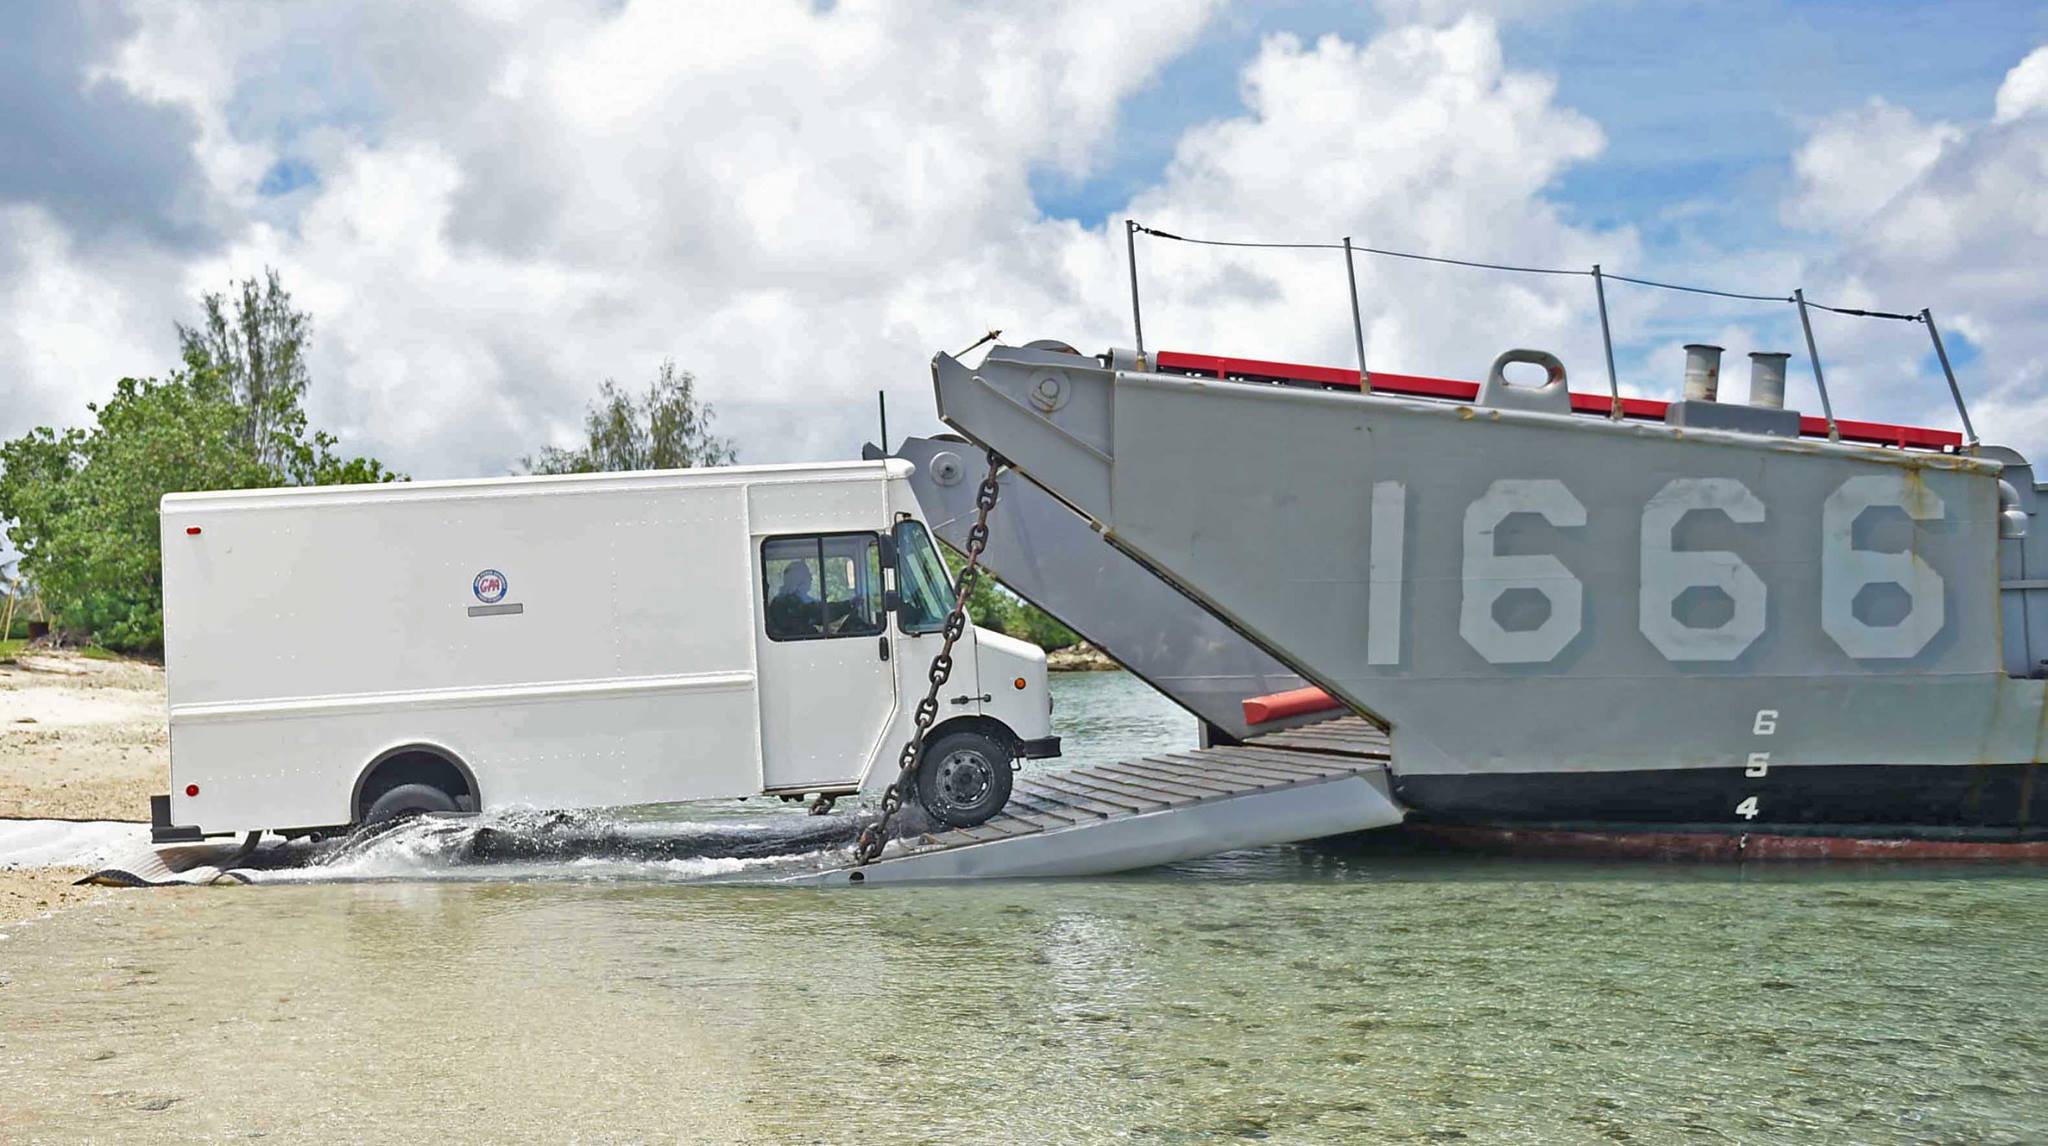 A civilian power generating truck is driven from a Guam beach onto the deck of Landing Craft Utility (LCU) 1666, attached to Naval Beach Unit (NBU) 7, for disaster relief efforts in Saipan after Typhoon Soudelor. US Navy photo via US Naval Base Guam Facebook page.